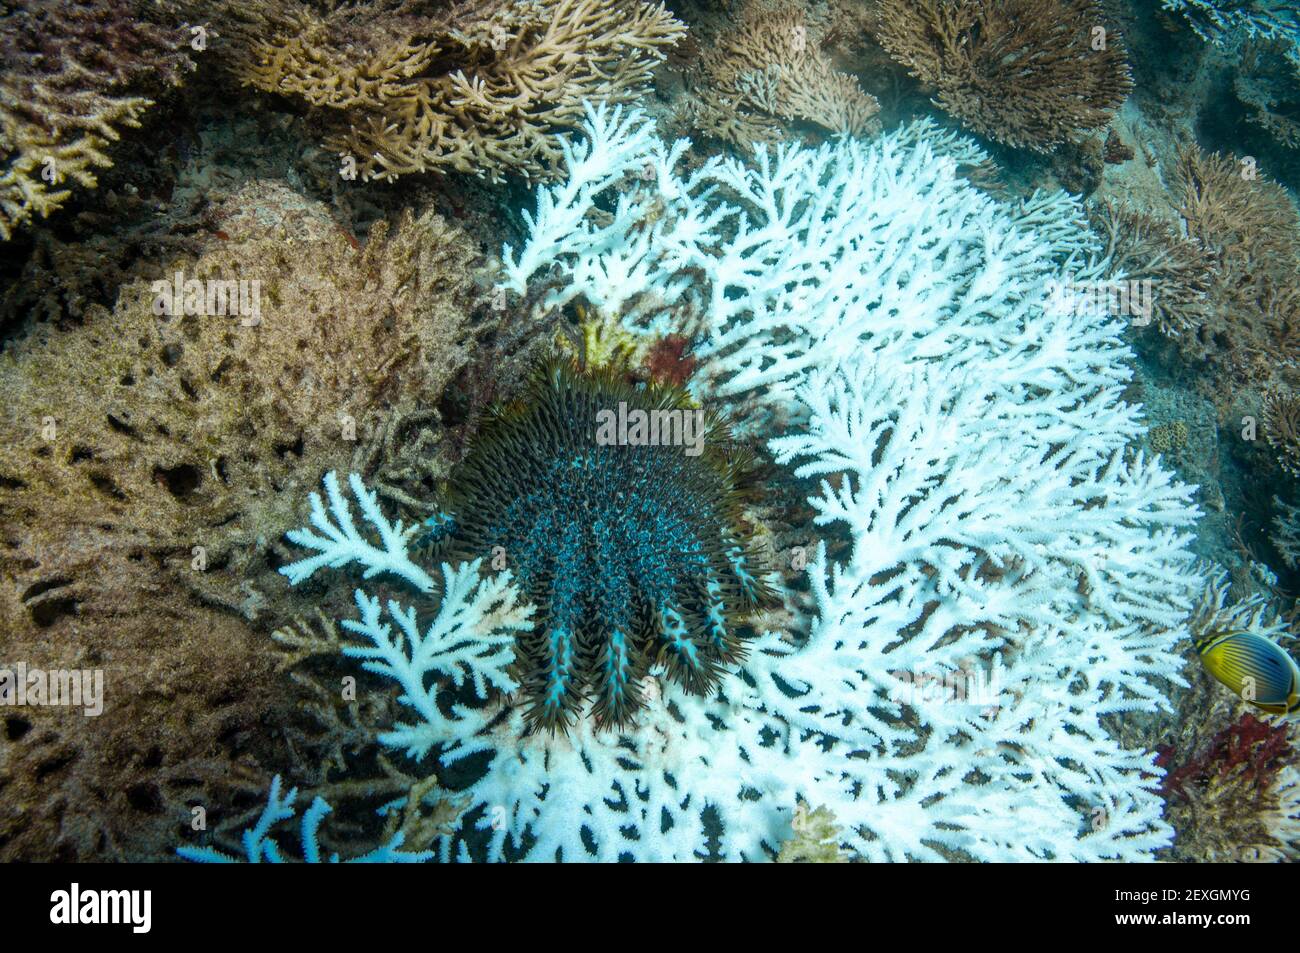 Long-spined Crown-of-Thorns, Acanthaster planci, eating coral Structure of Acropora clathrata. Bleaching Coral Stock Photo